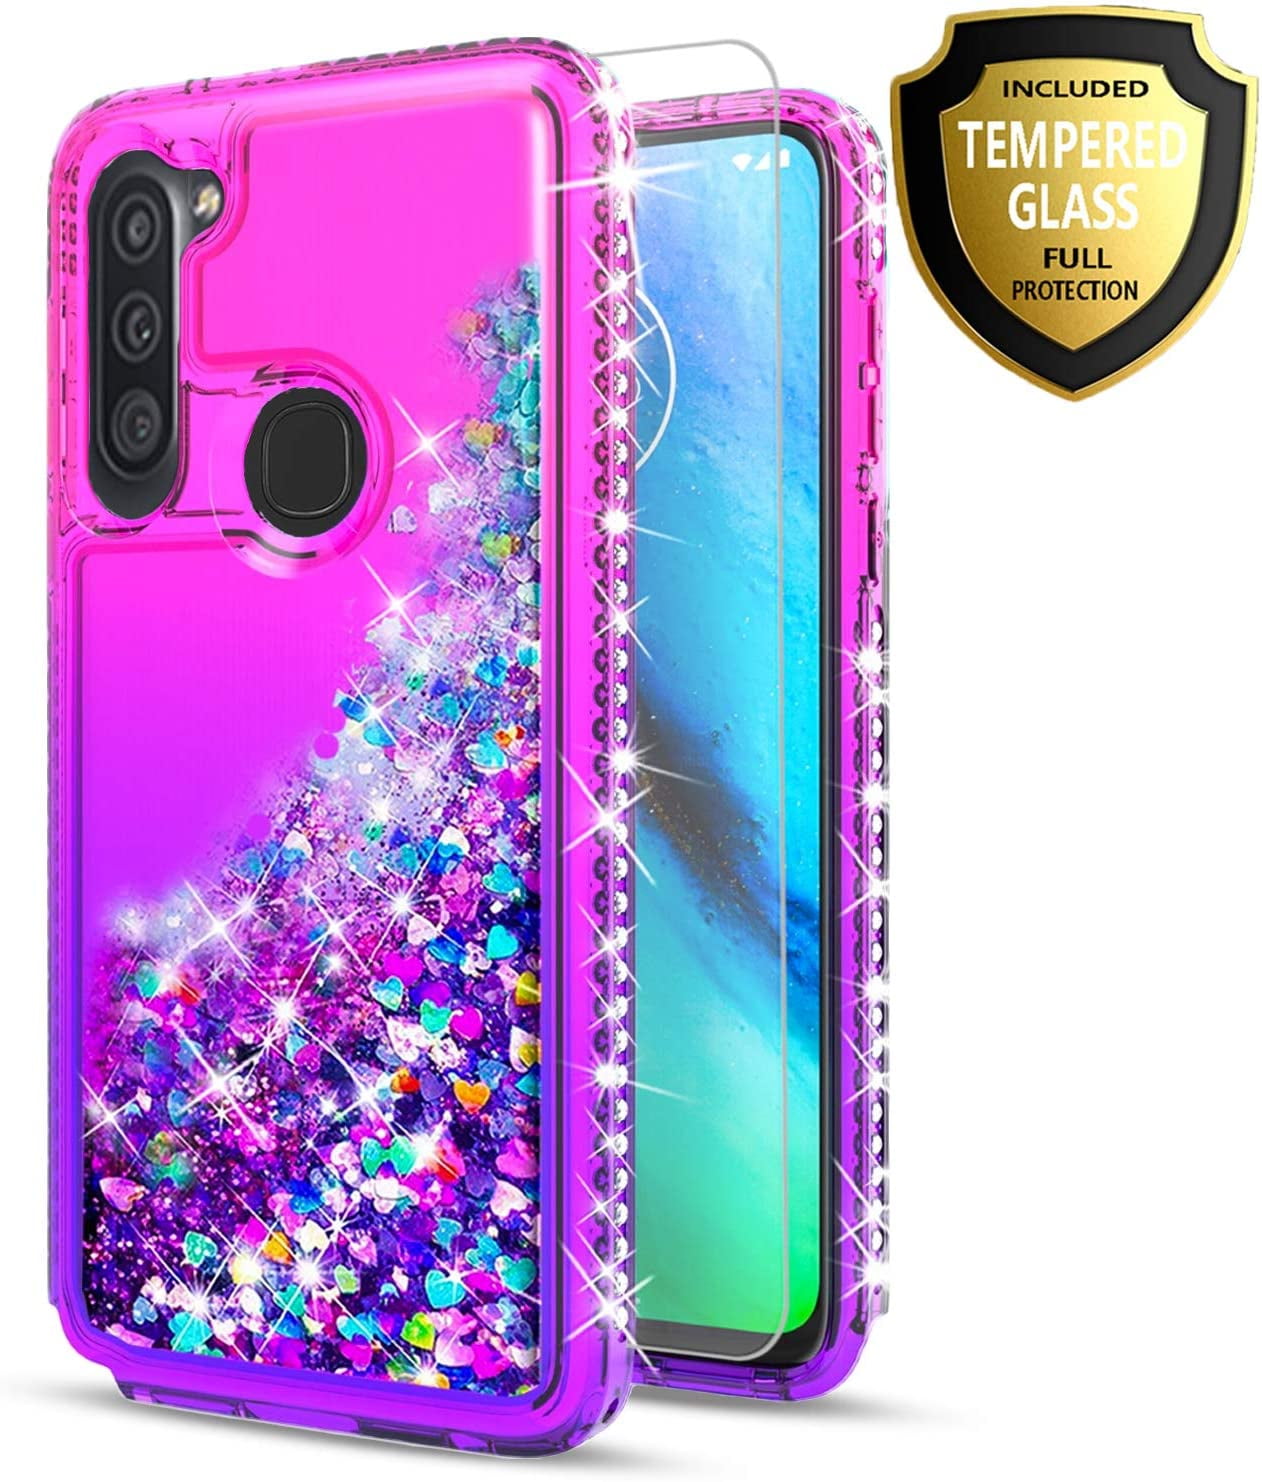 samsung-galaxy-a11-phone-case-with-tempered-glass-protector-included-liquid-floating-glitter